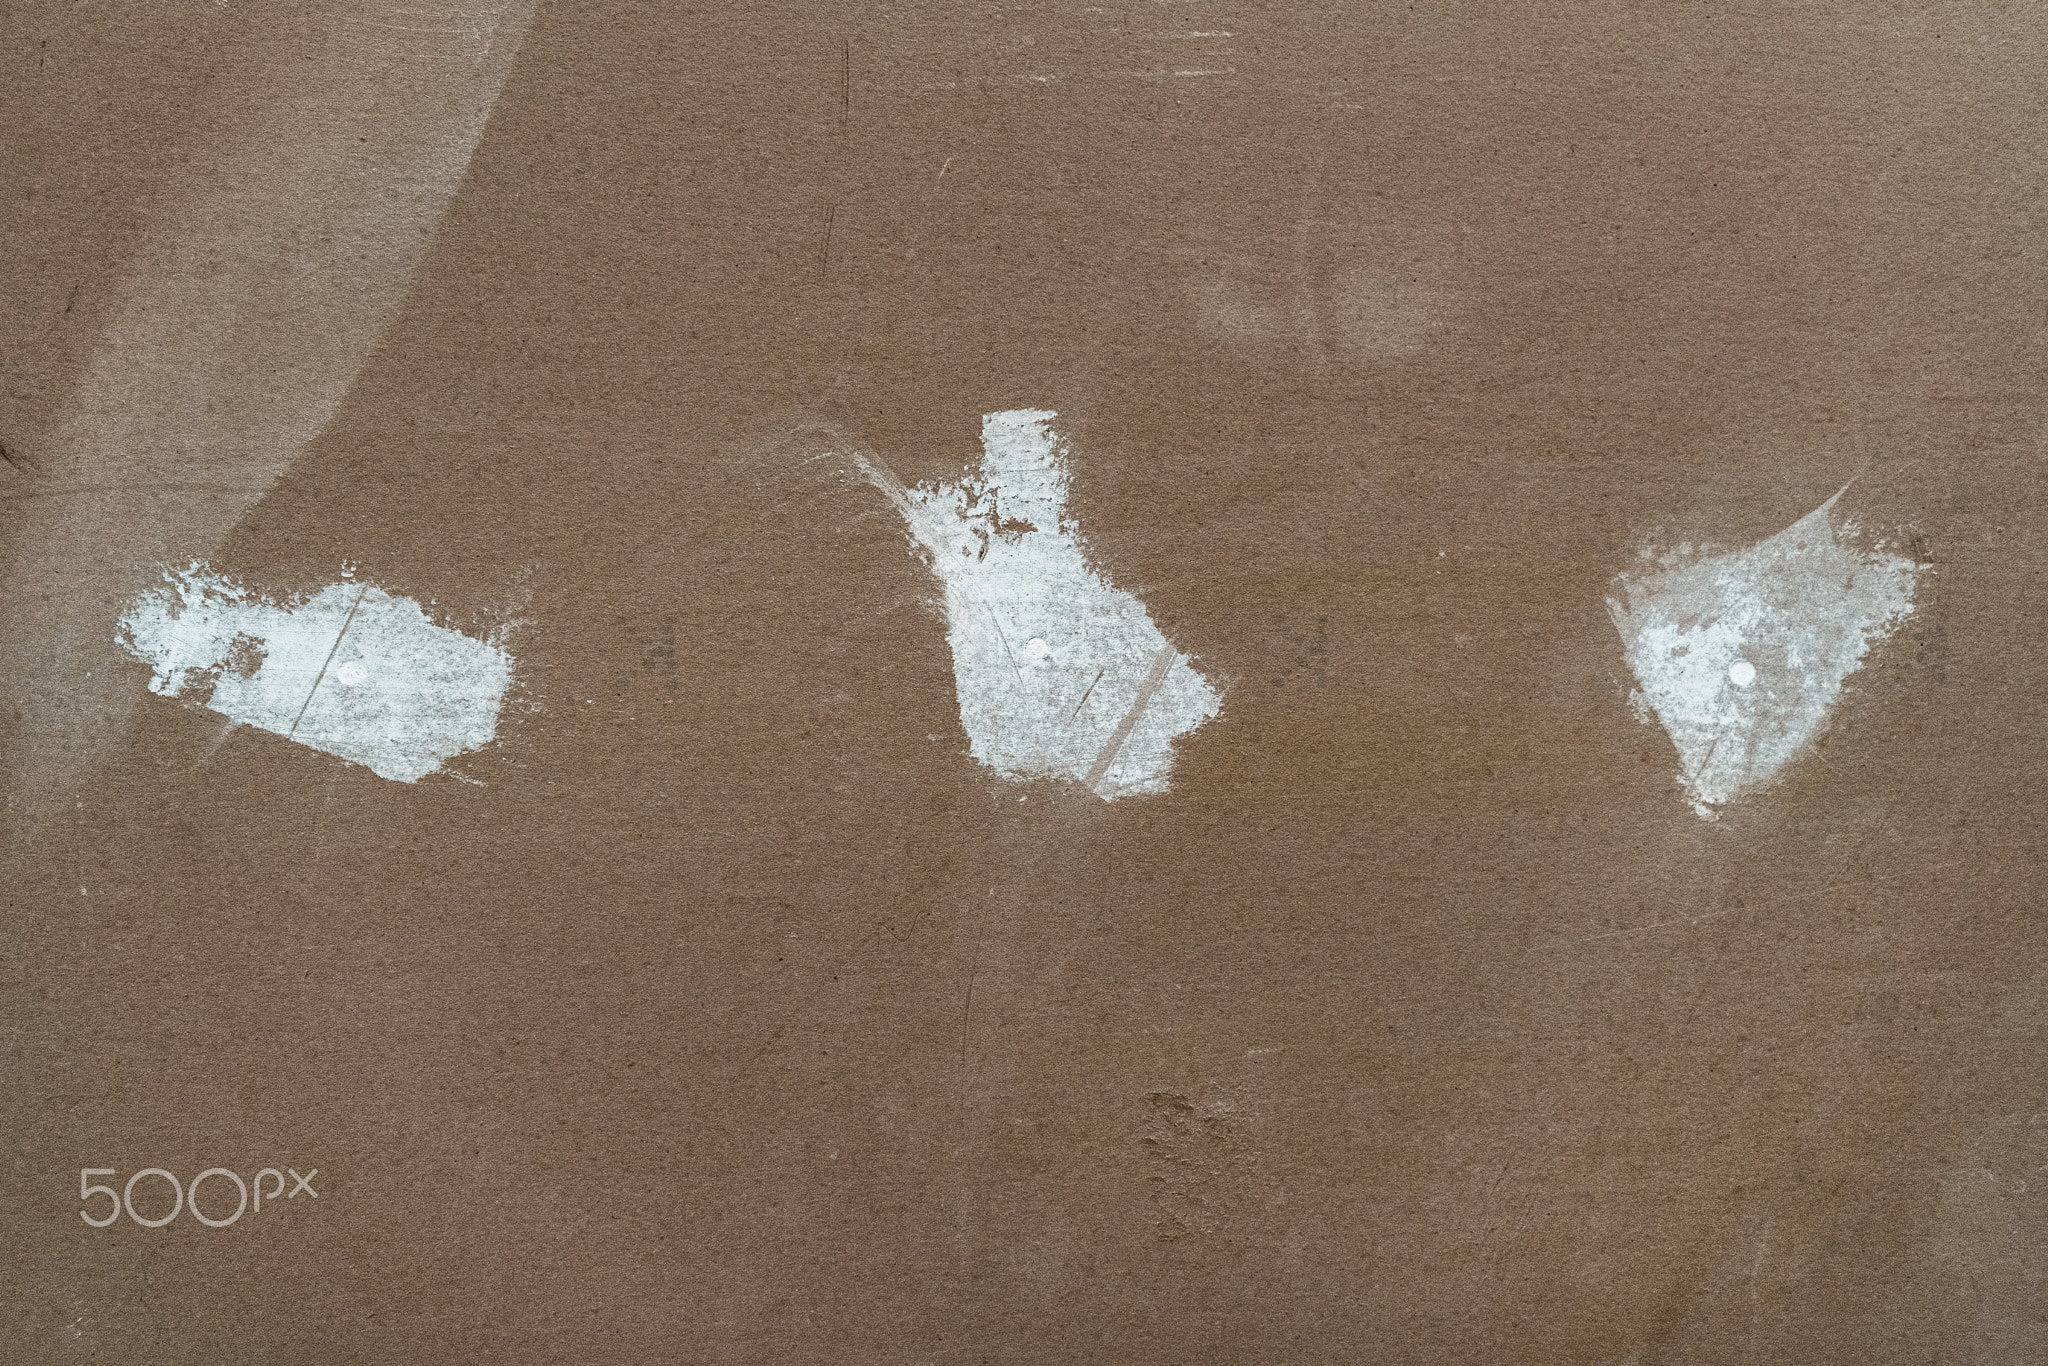 Drywall panel with plastered holes on it. White putty on drywall